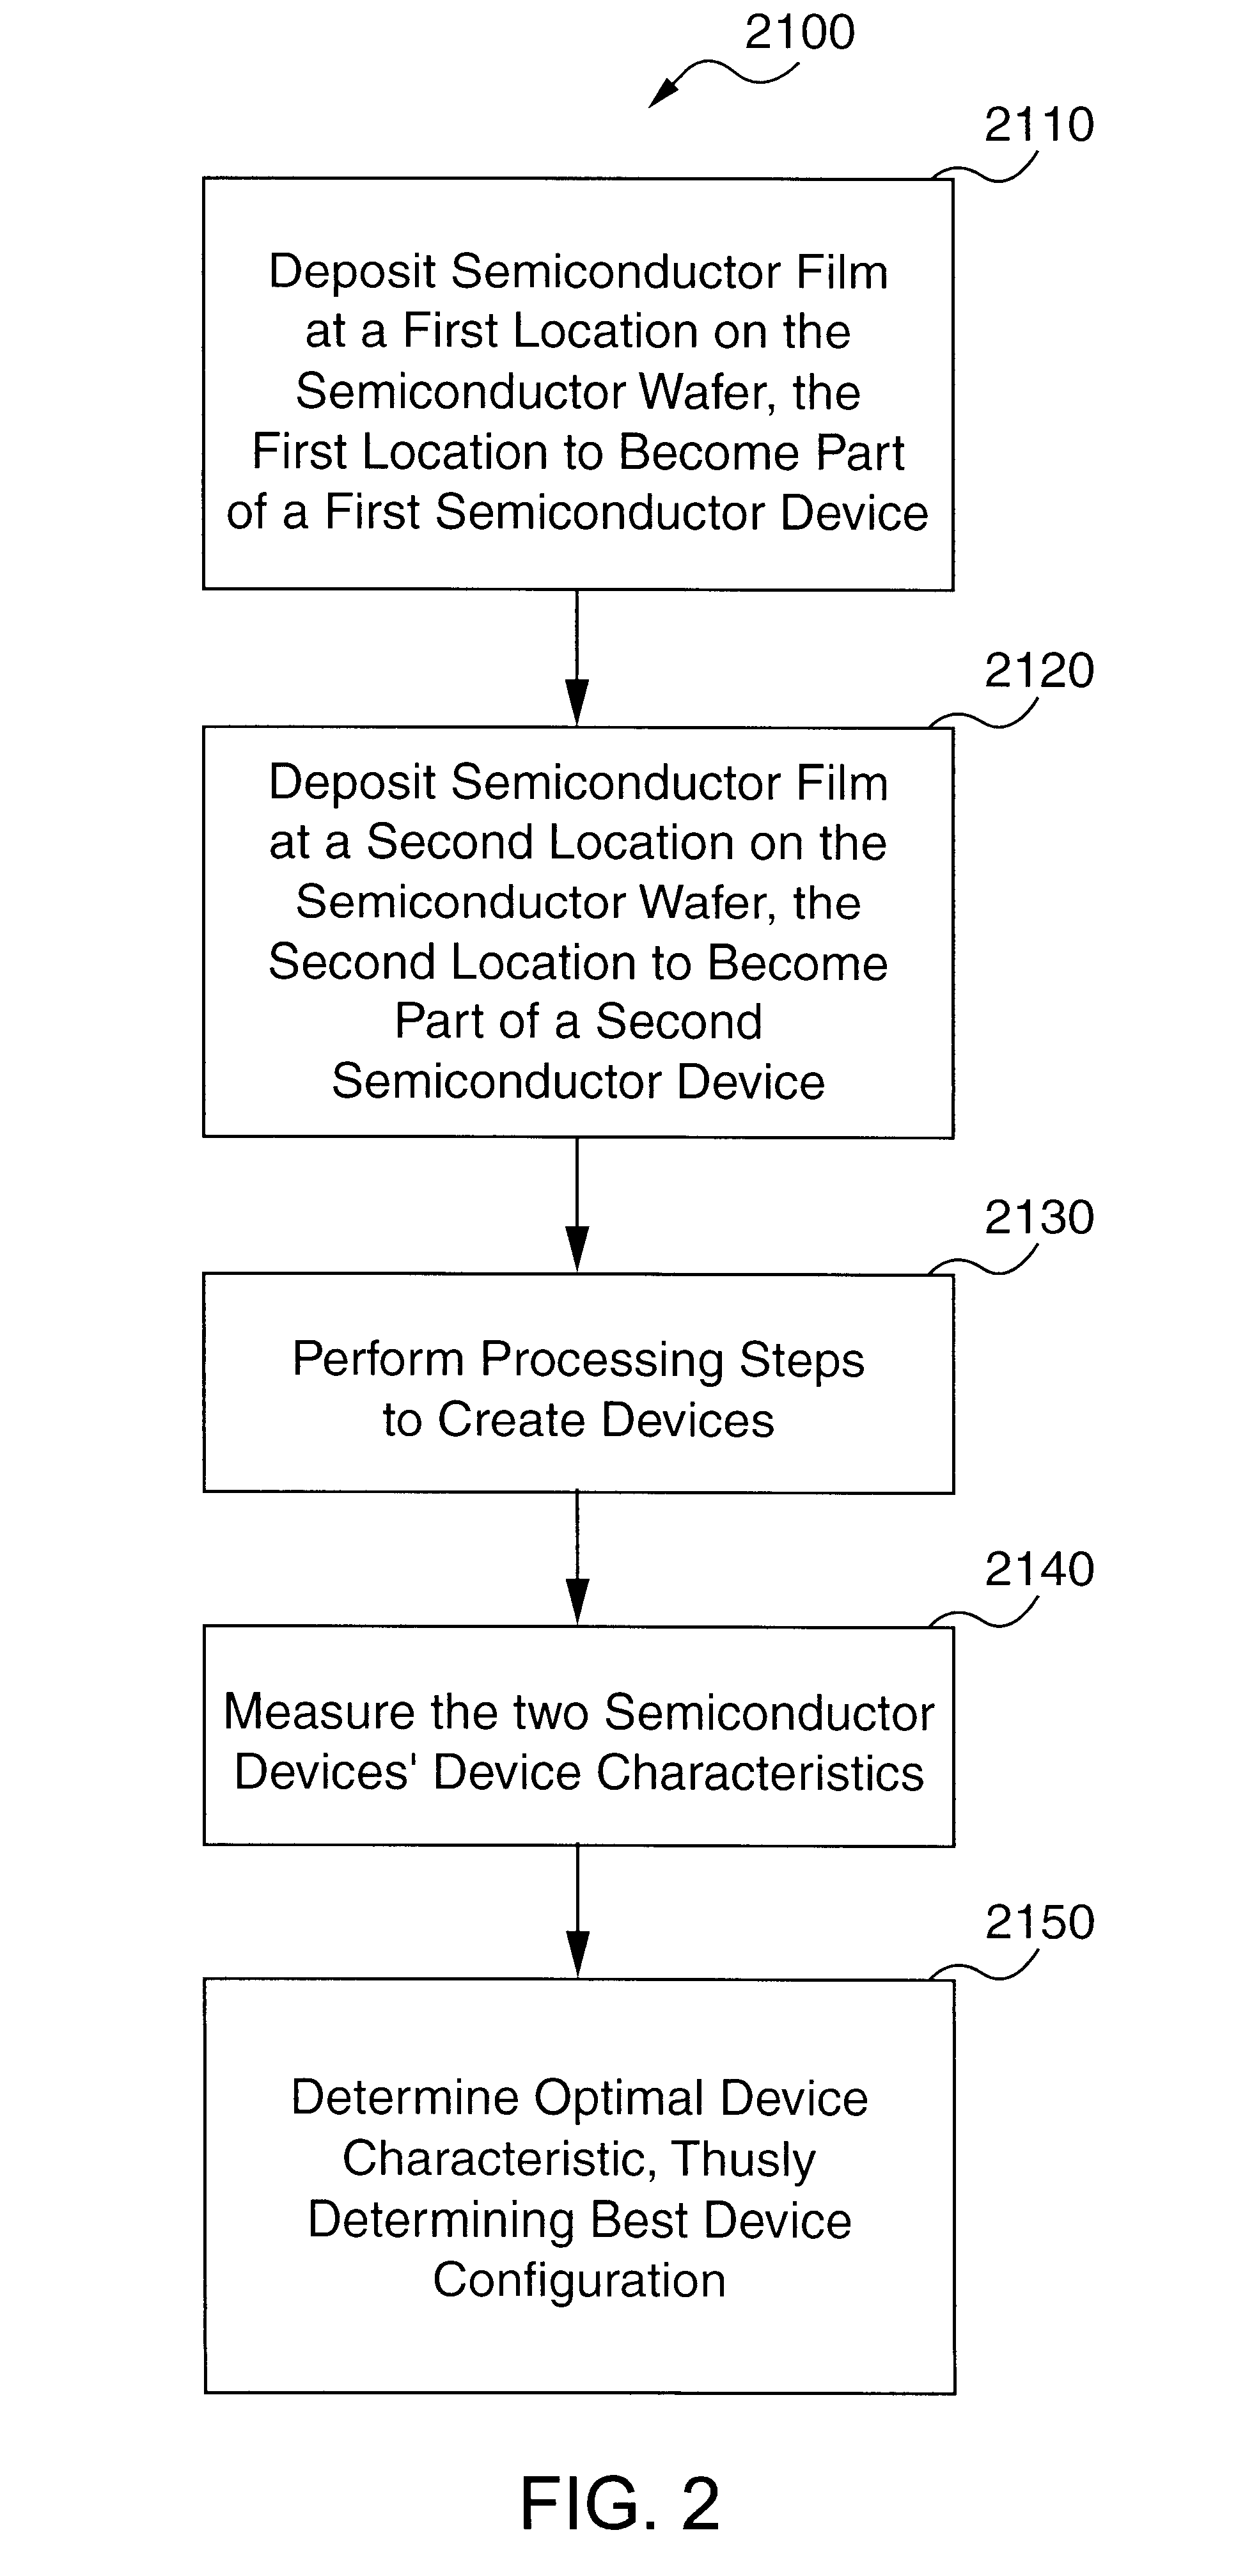 Deliberate semiconductor film variation to compensate for radial processing differences, determine optimal device characteristics, or produce small productions